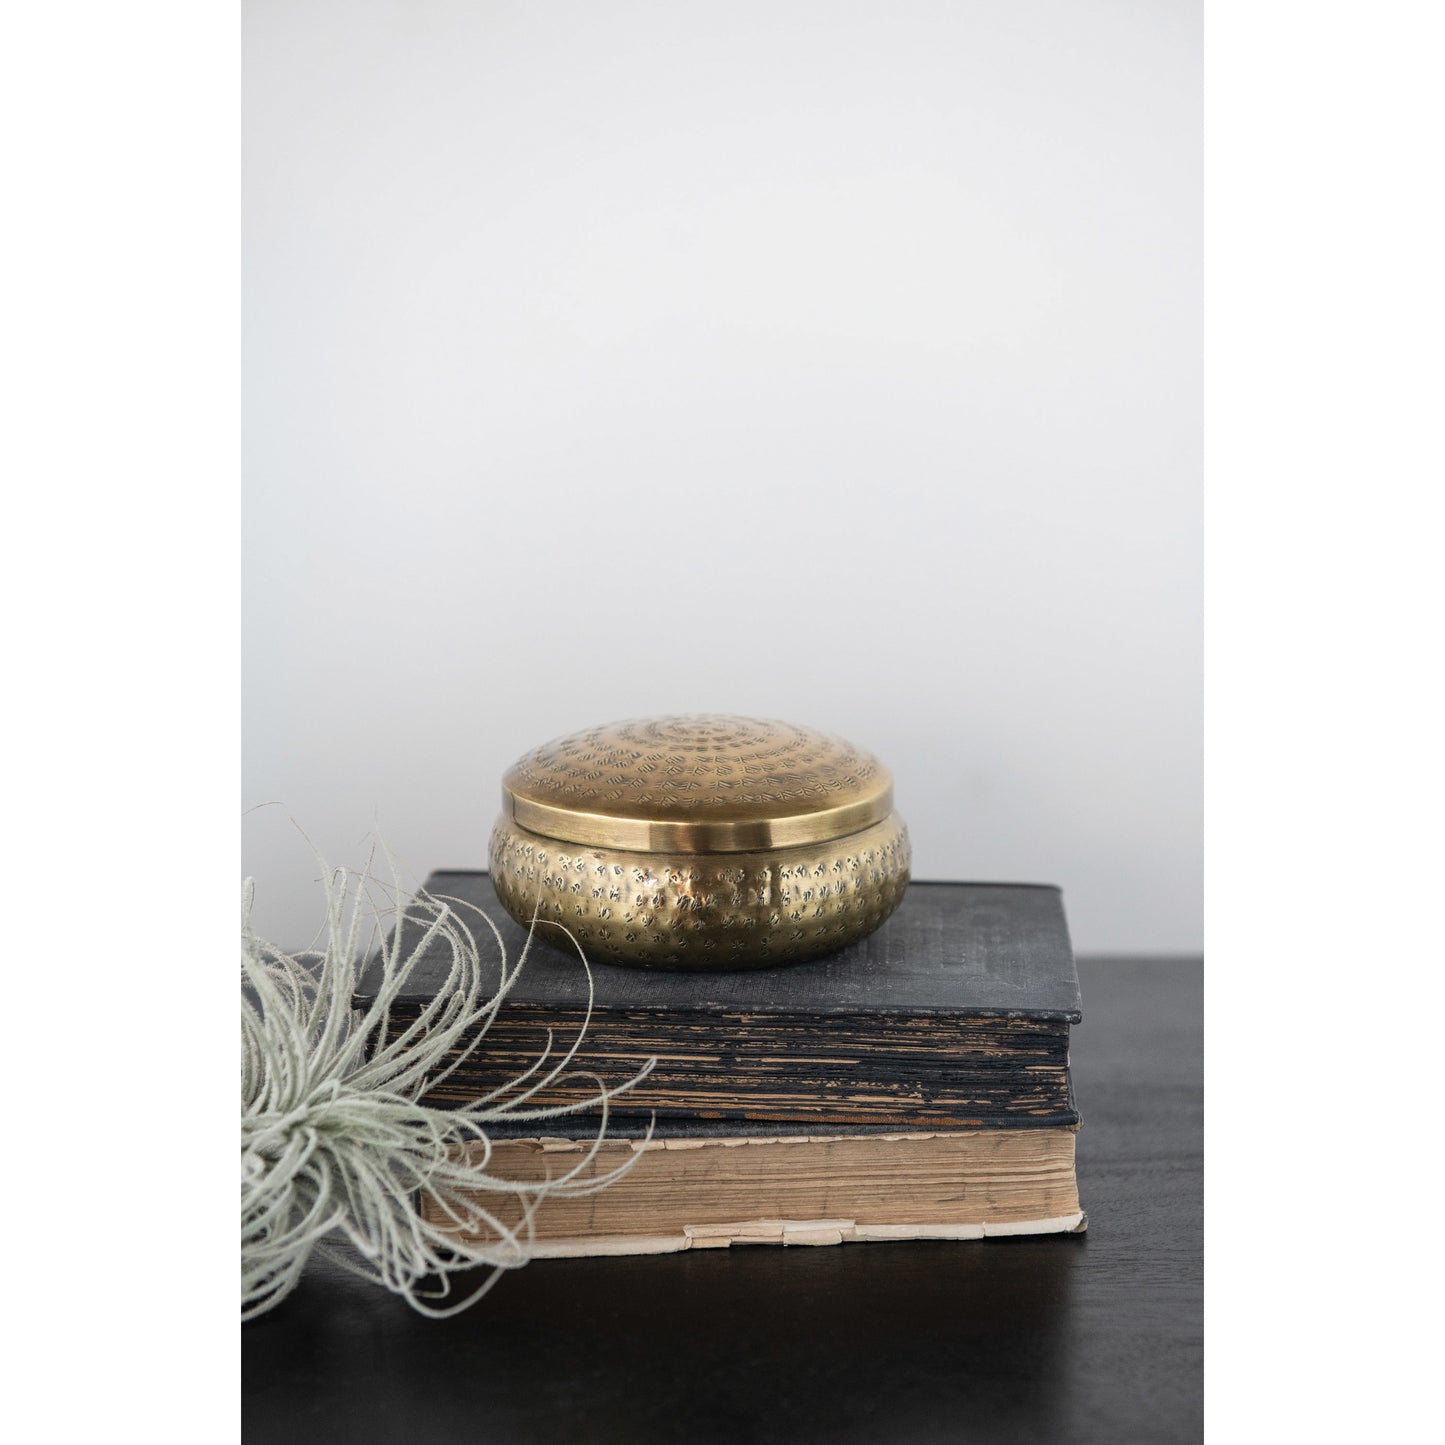 5" Round x 2"H Hammered Metal Container, Brass Finish